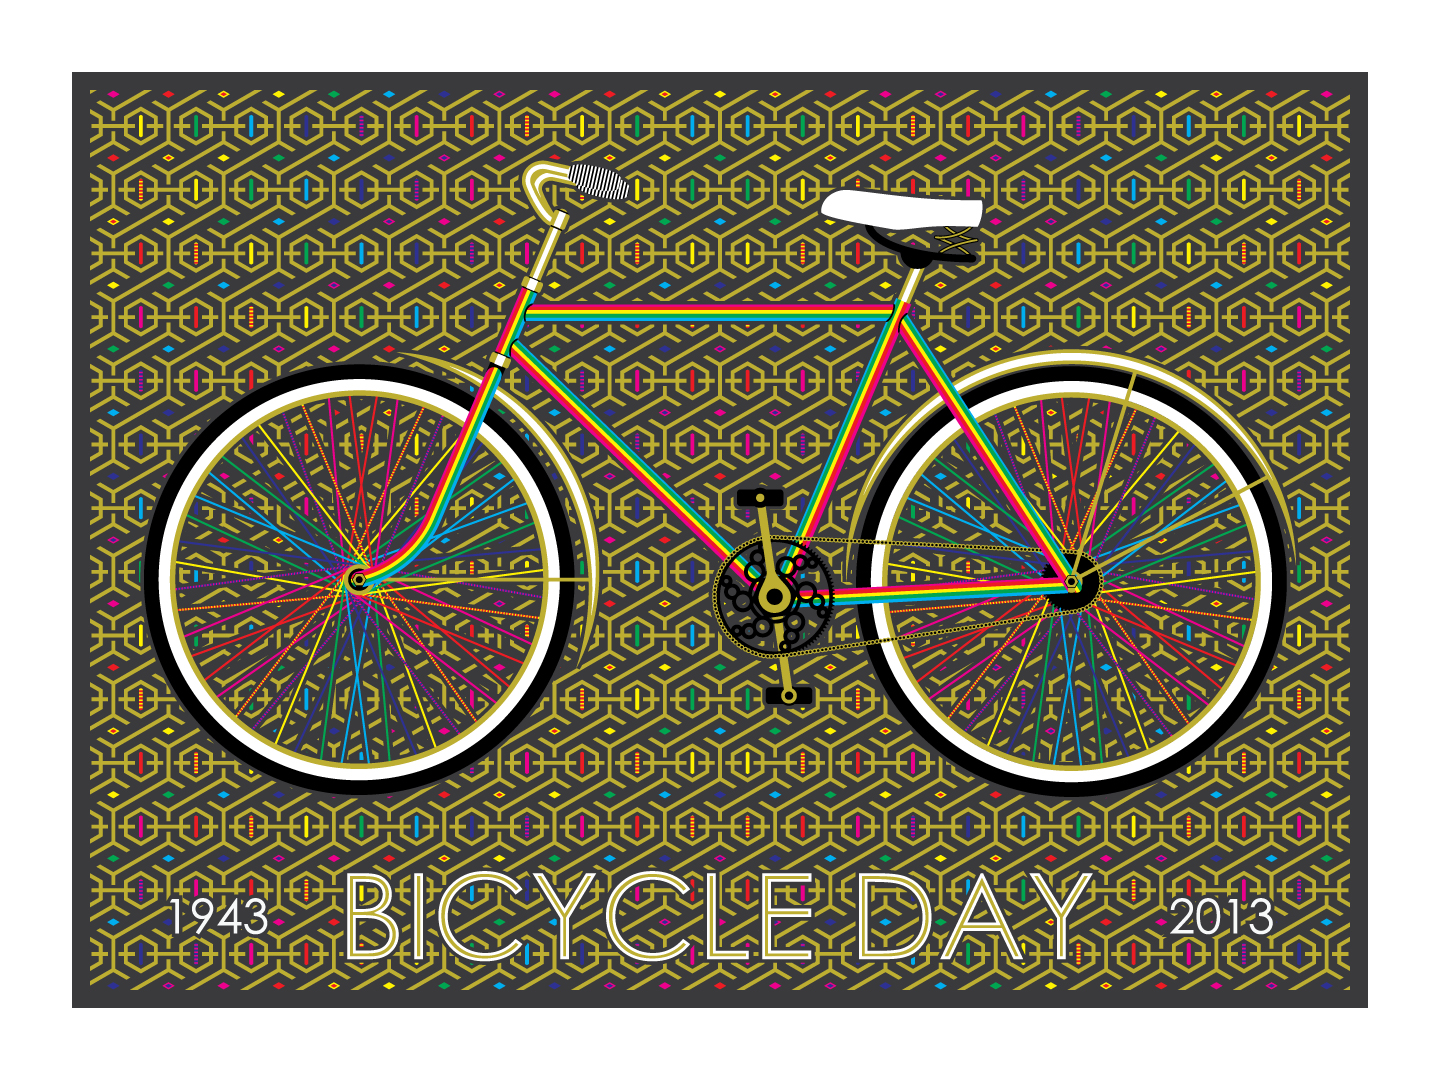 Nick Doyle's Art Blog HAPPY BICYCLE DAY! Free shipping on all Bicycle